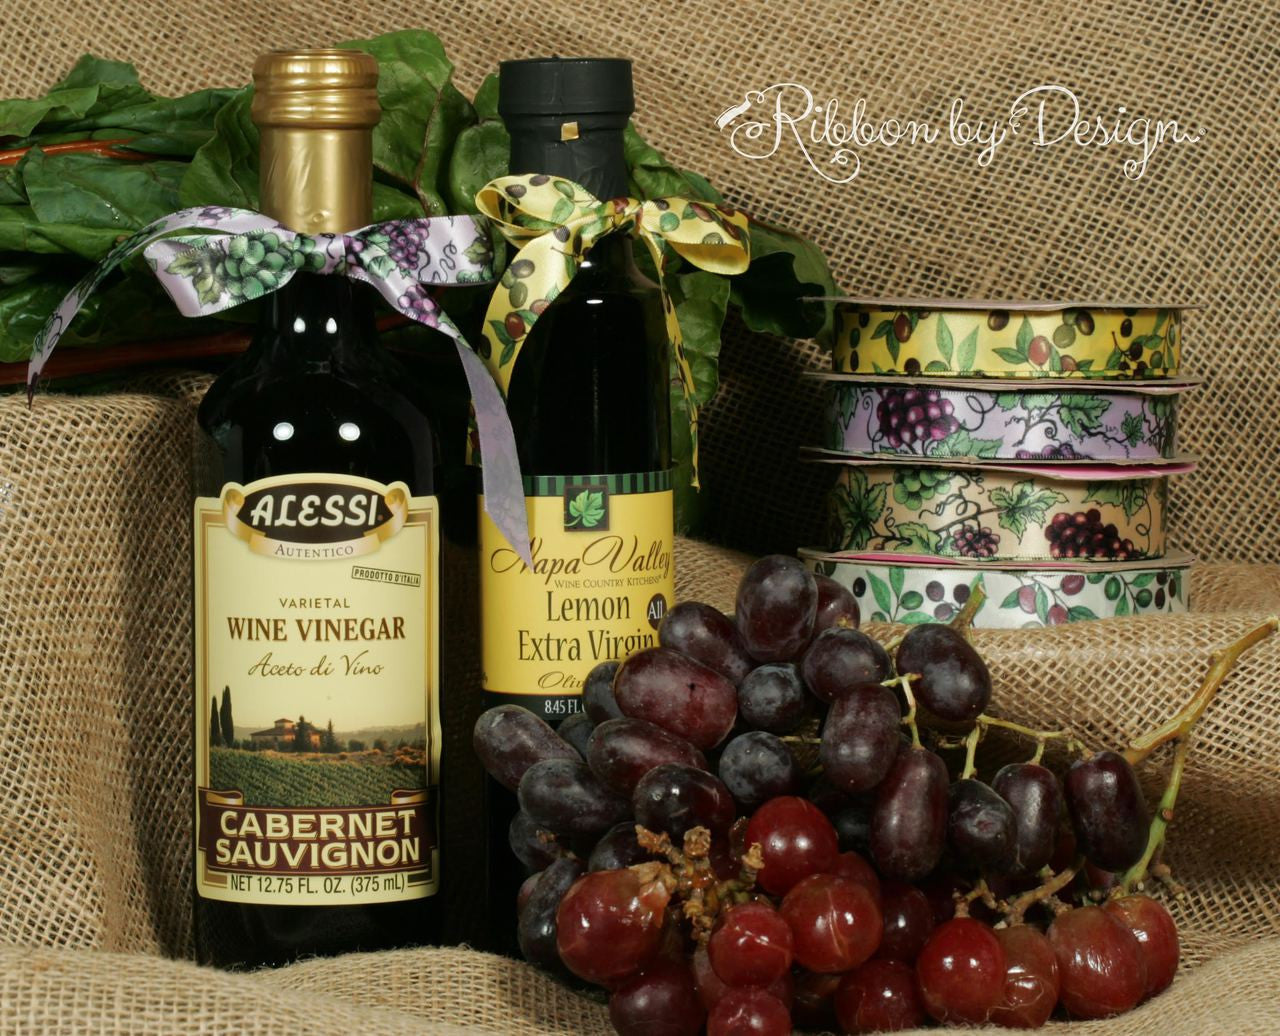 The Grapes and Olives collections!